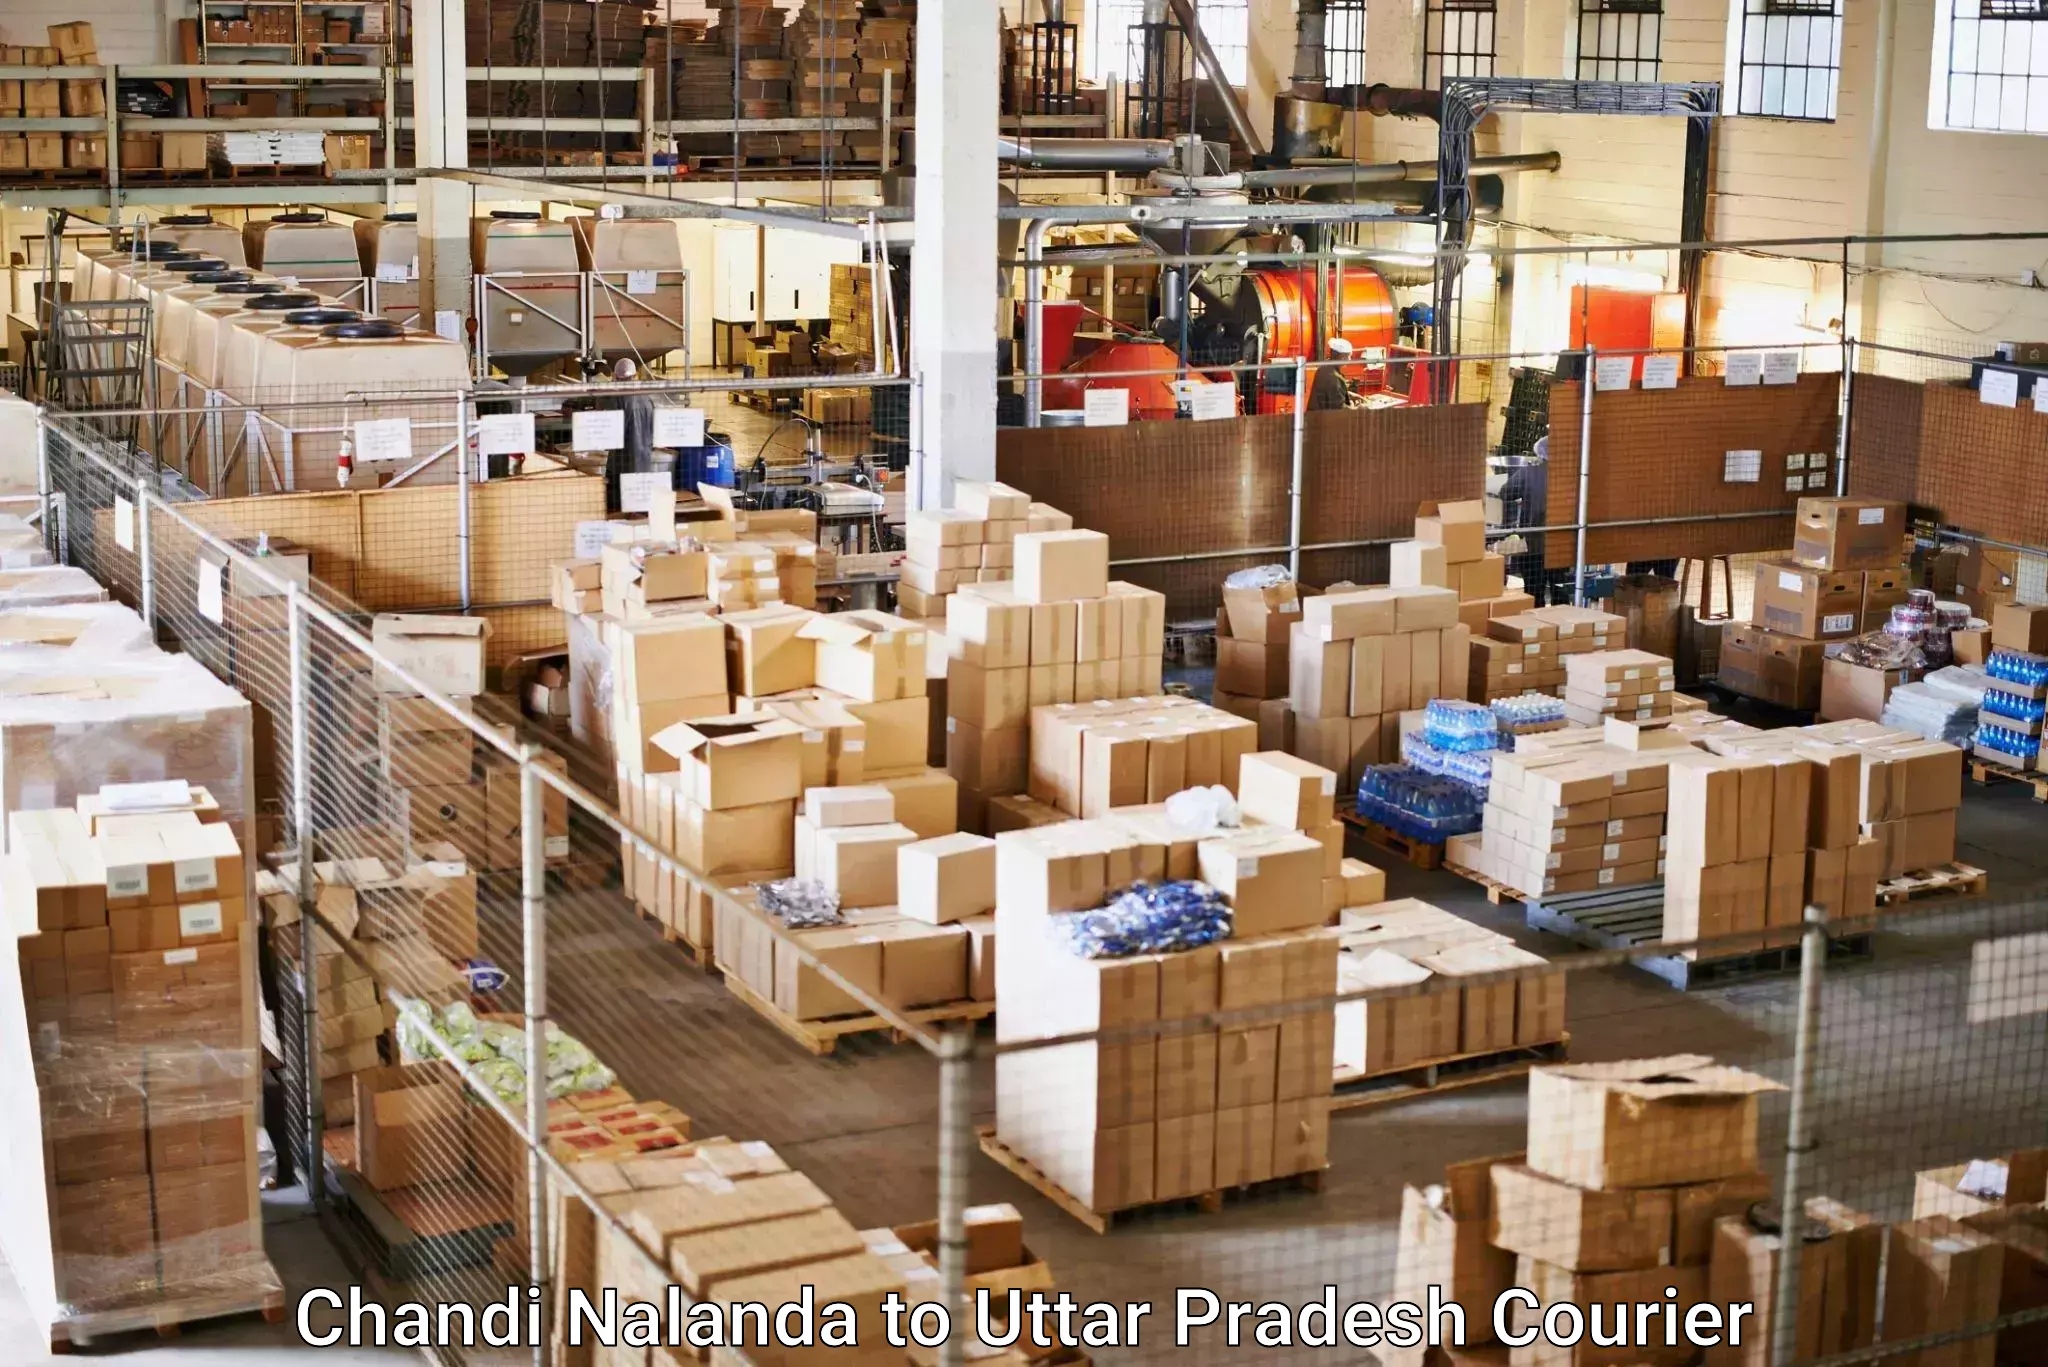 Parcel service for businesses in Chandi Nalanda to Allahabad